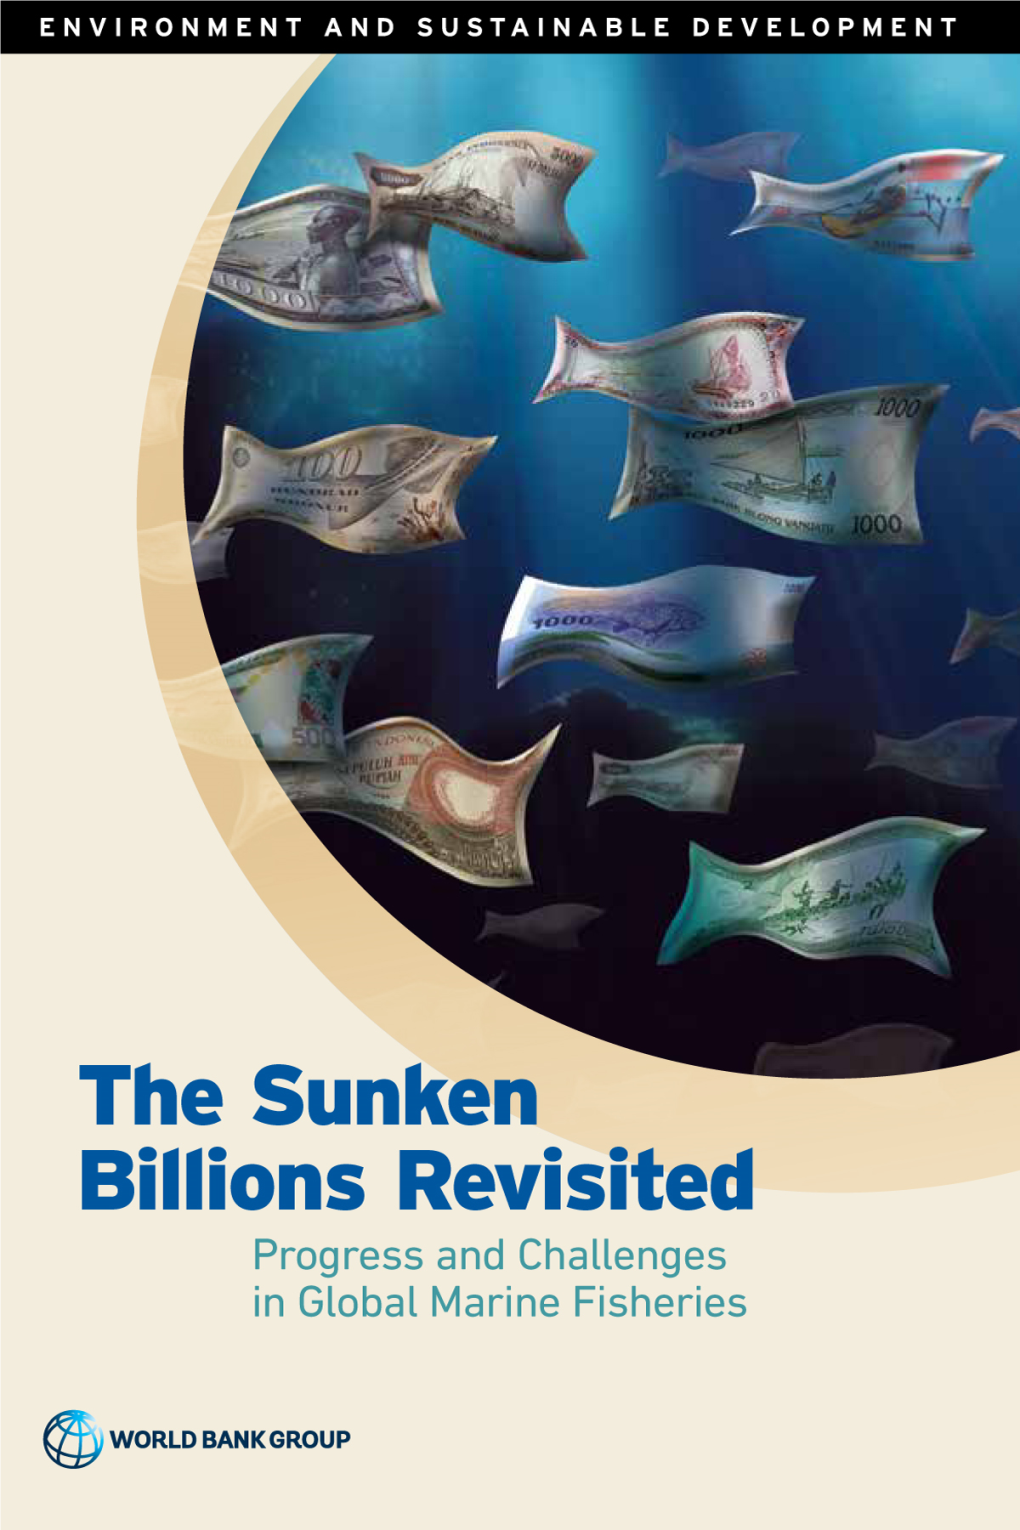 The Sunken Billions Revisited ENVIRONMENT and SUSTAINABLE DEVELOPMENT